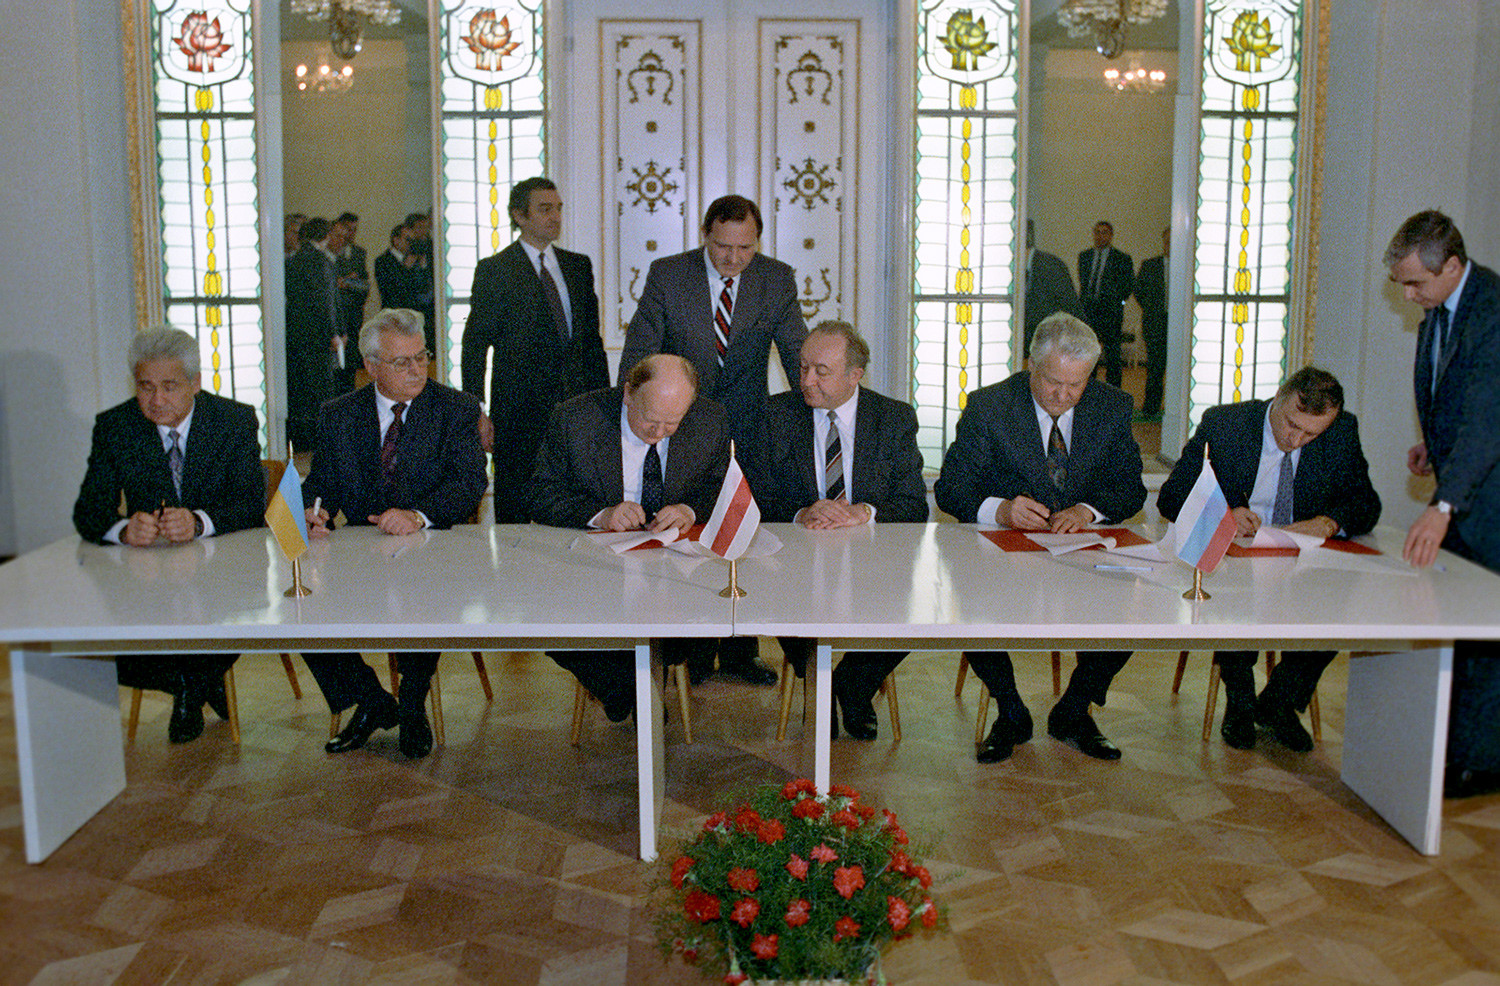 Leaders of Russia, Belarus and Ukraine declared the death of the Soviet Union and formed a Commonwealth of Independent States.